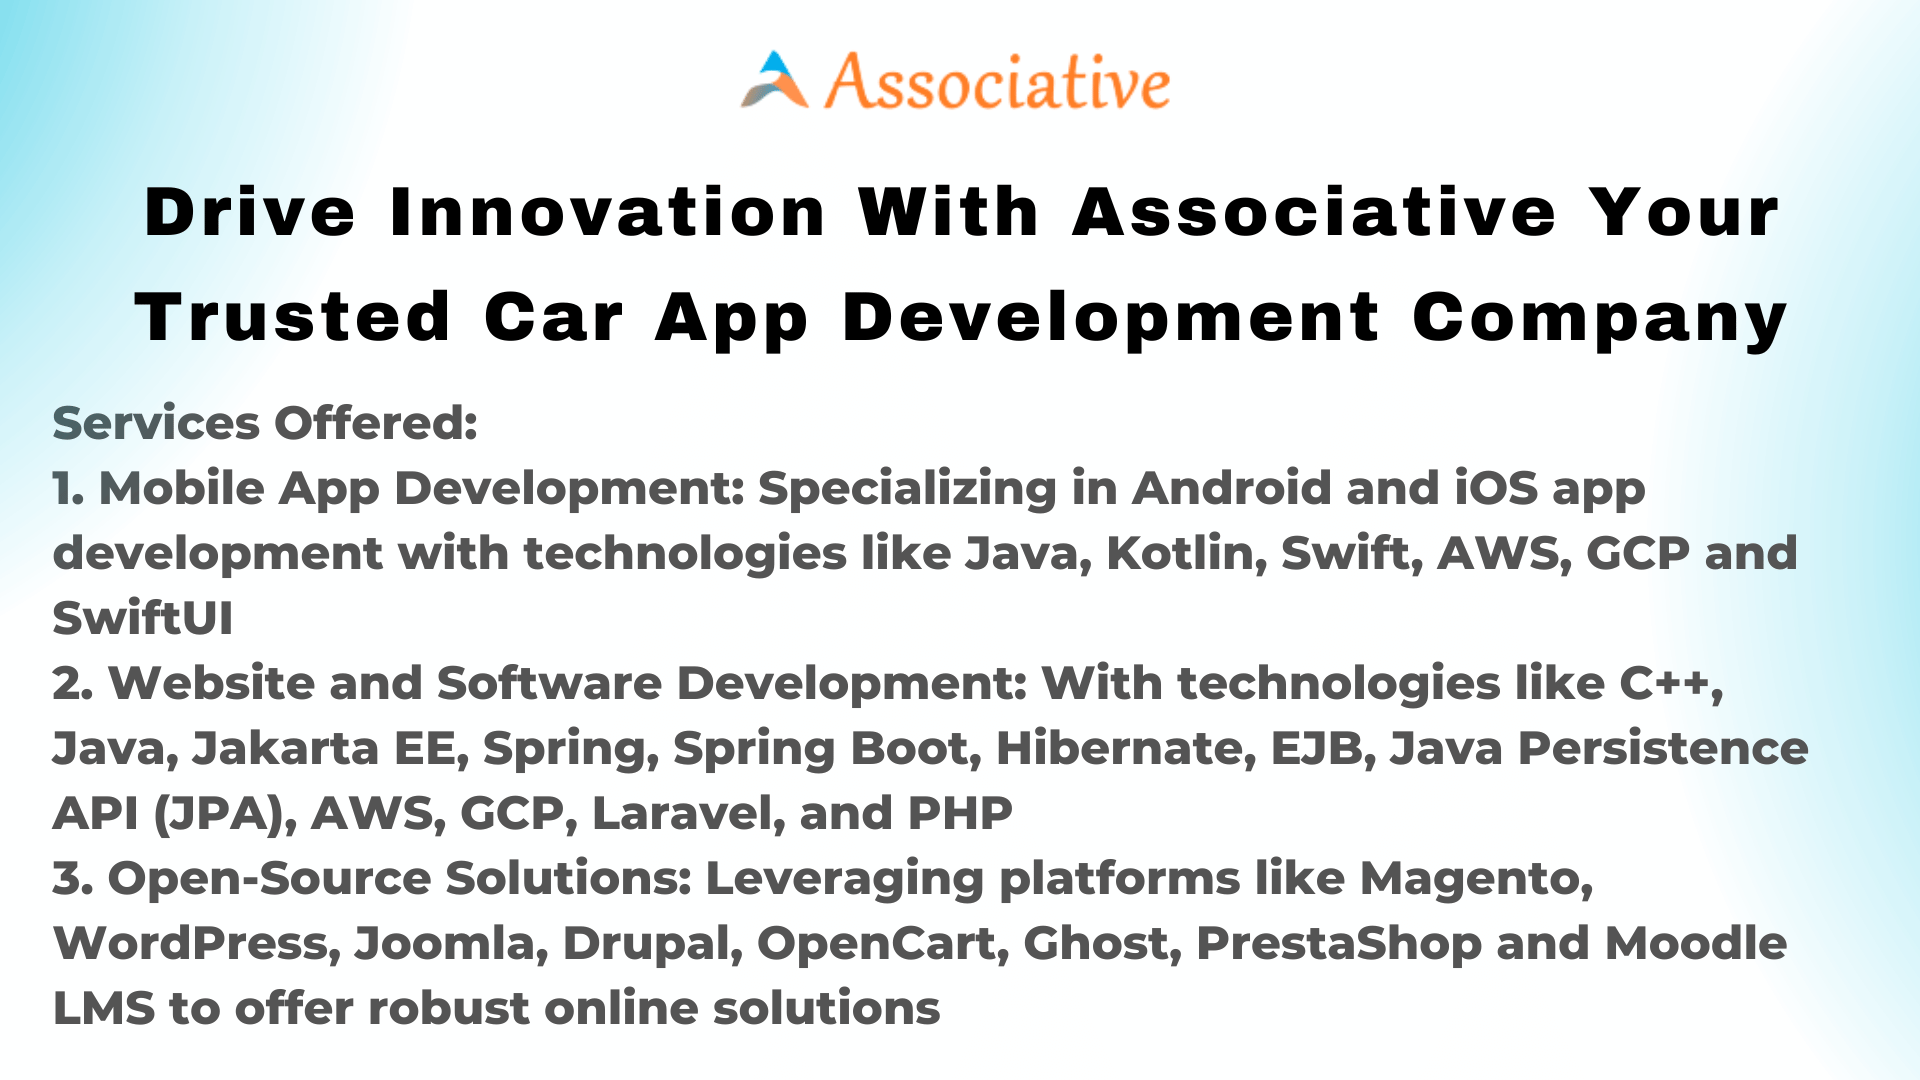 Drive Innovation with Associative Your Trusted Car App Development Company